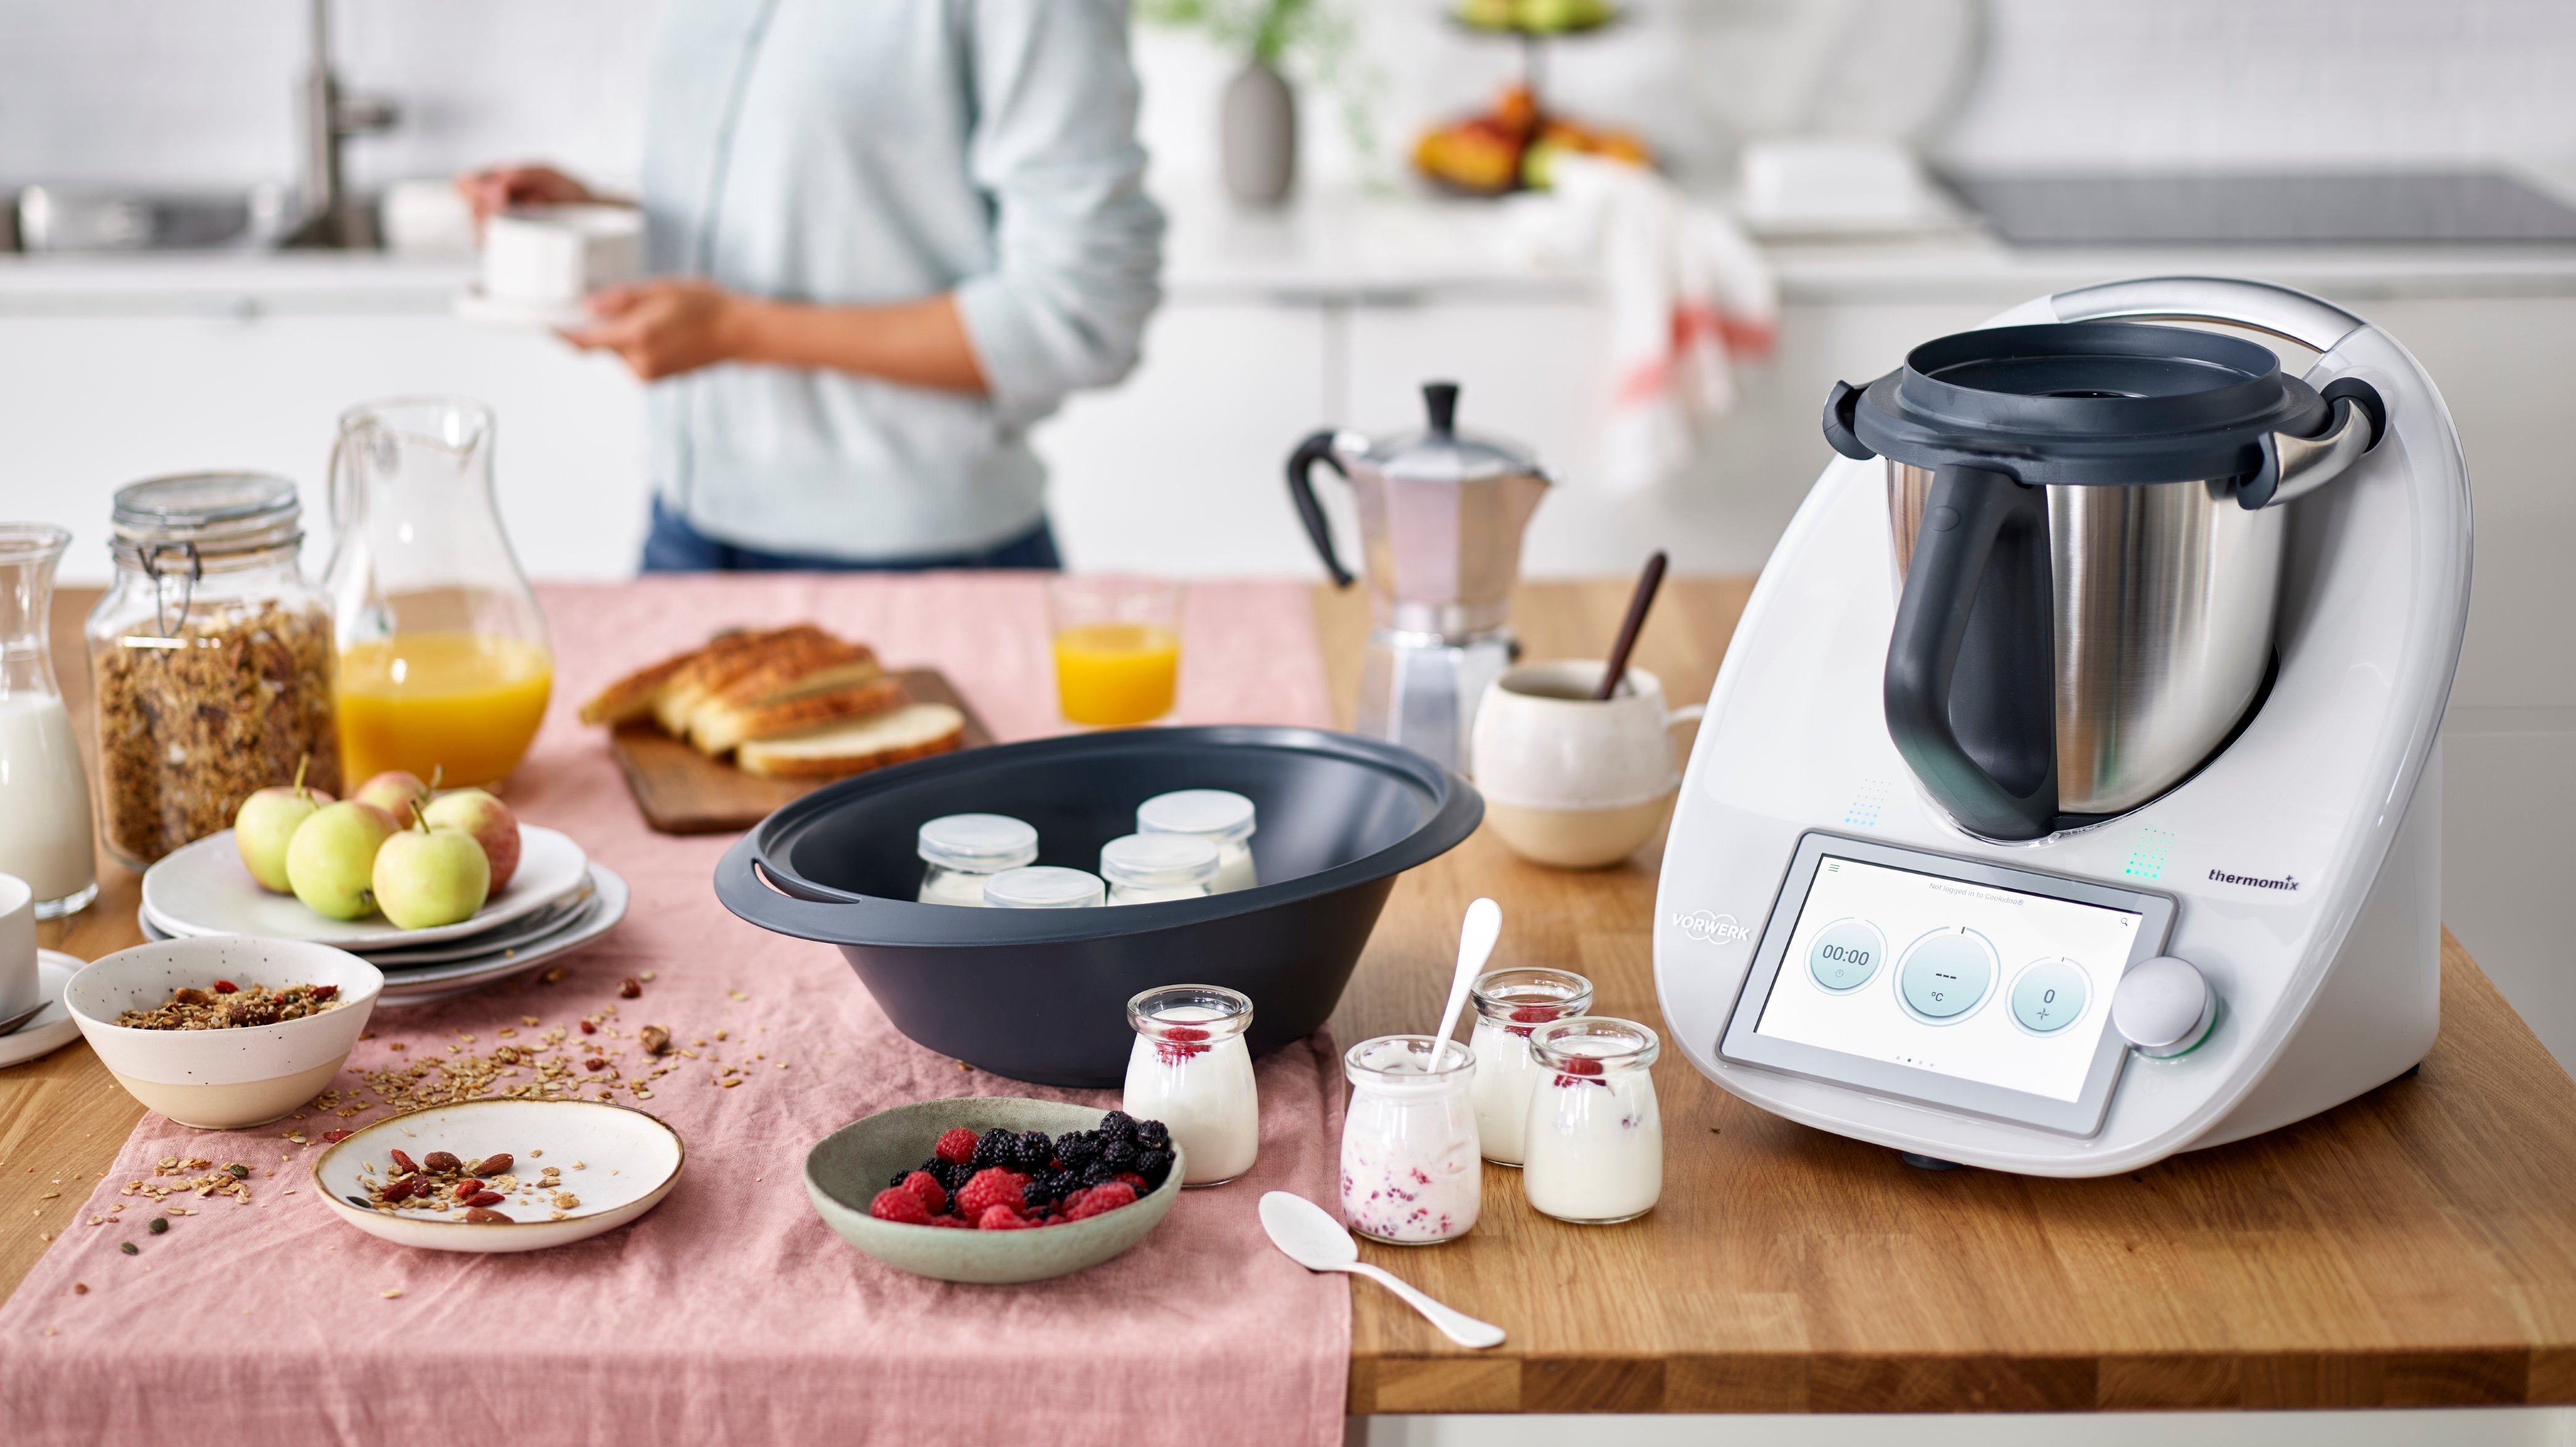 Thermomix being used in a smart kitchen